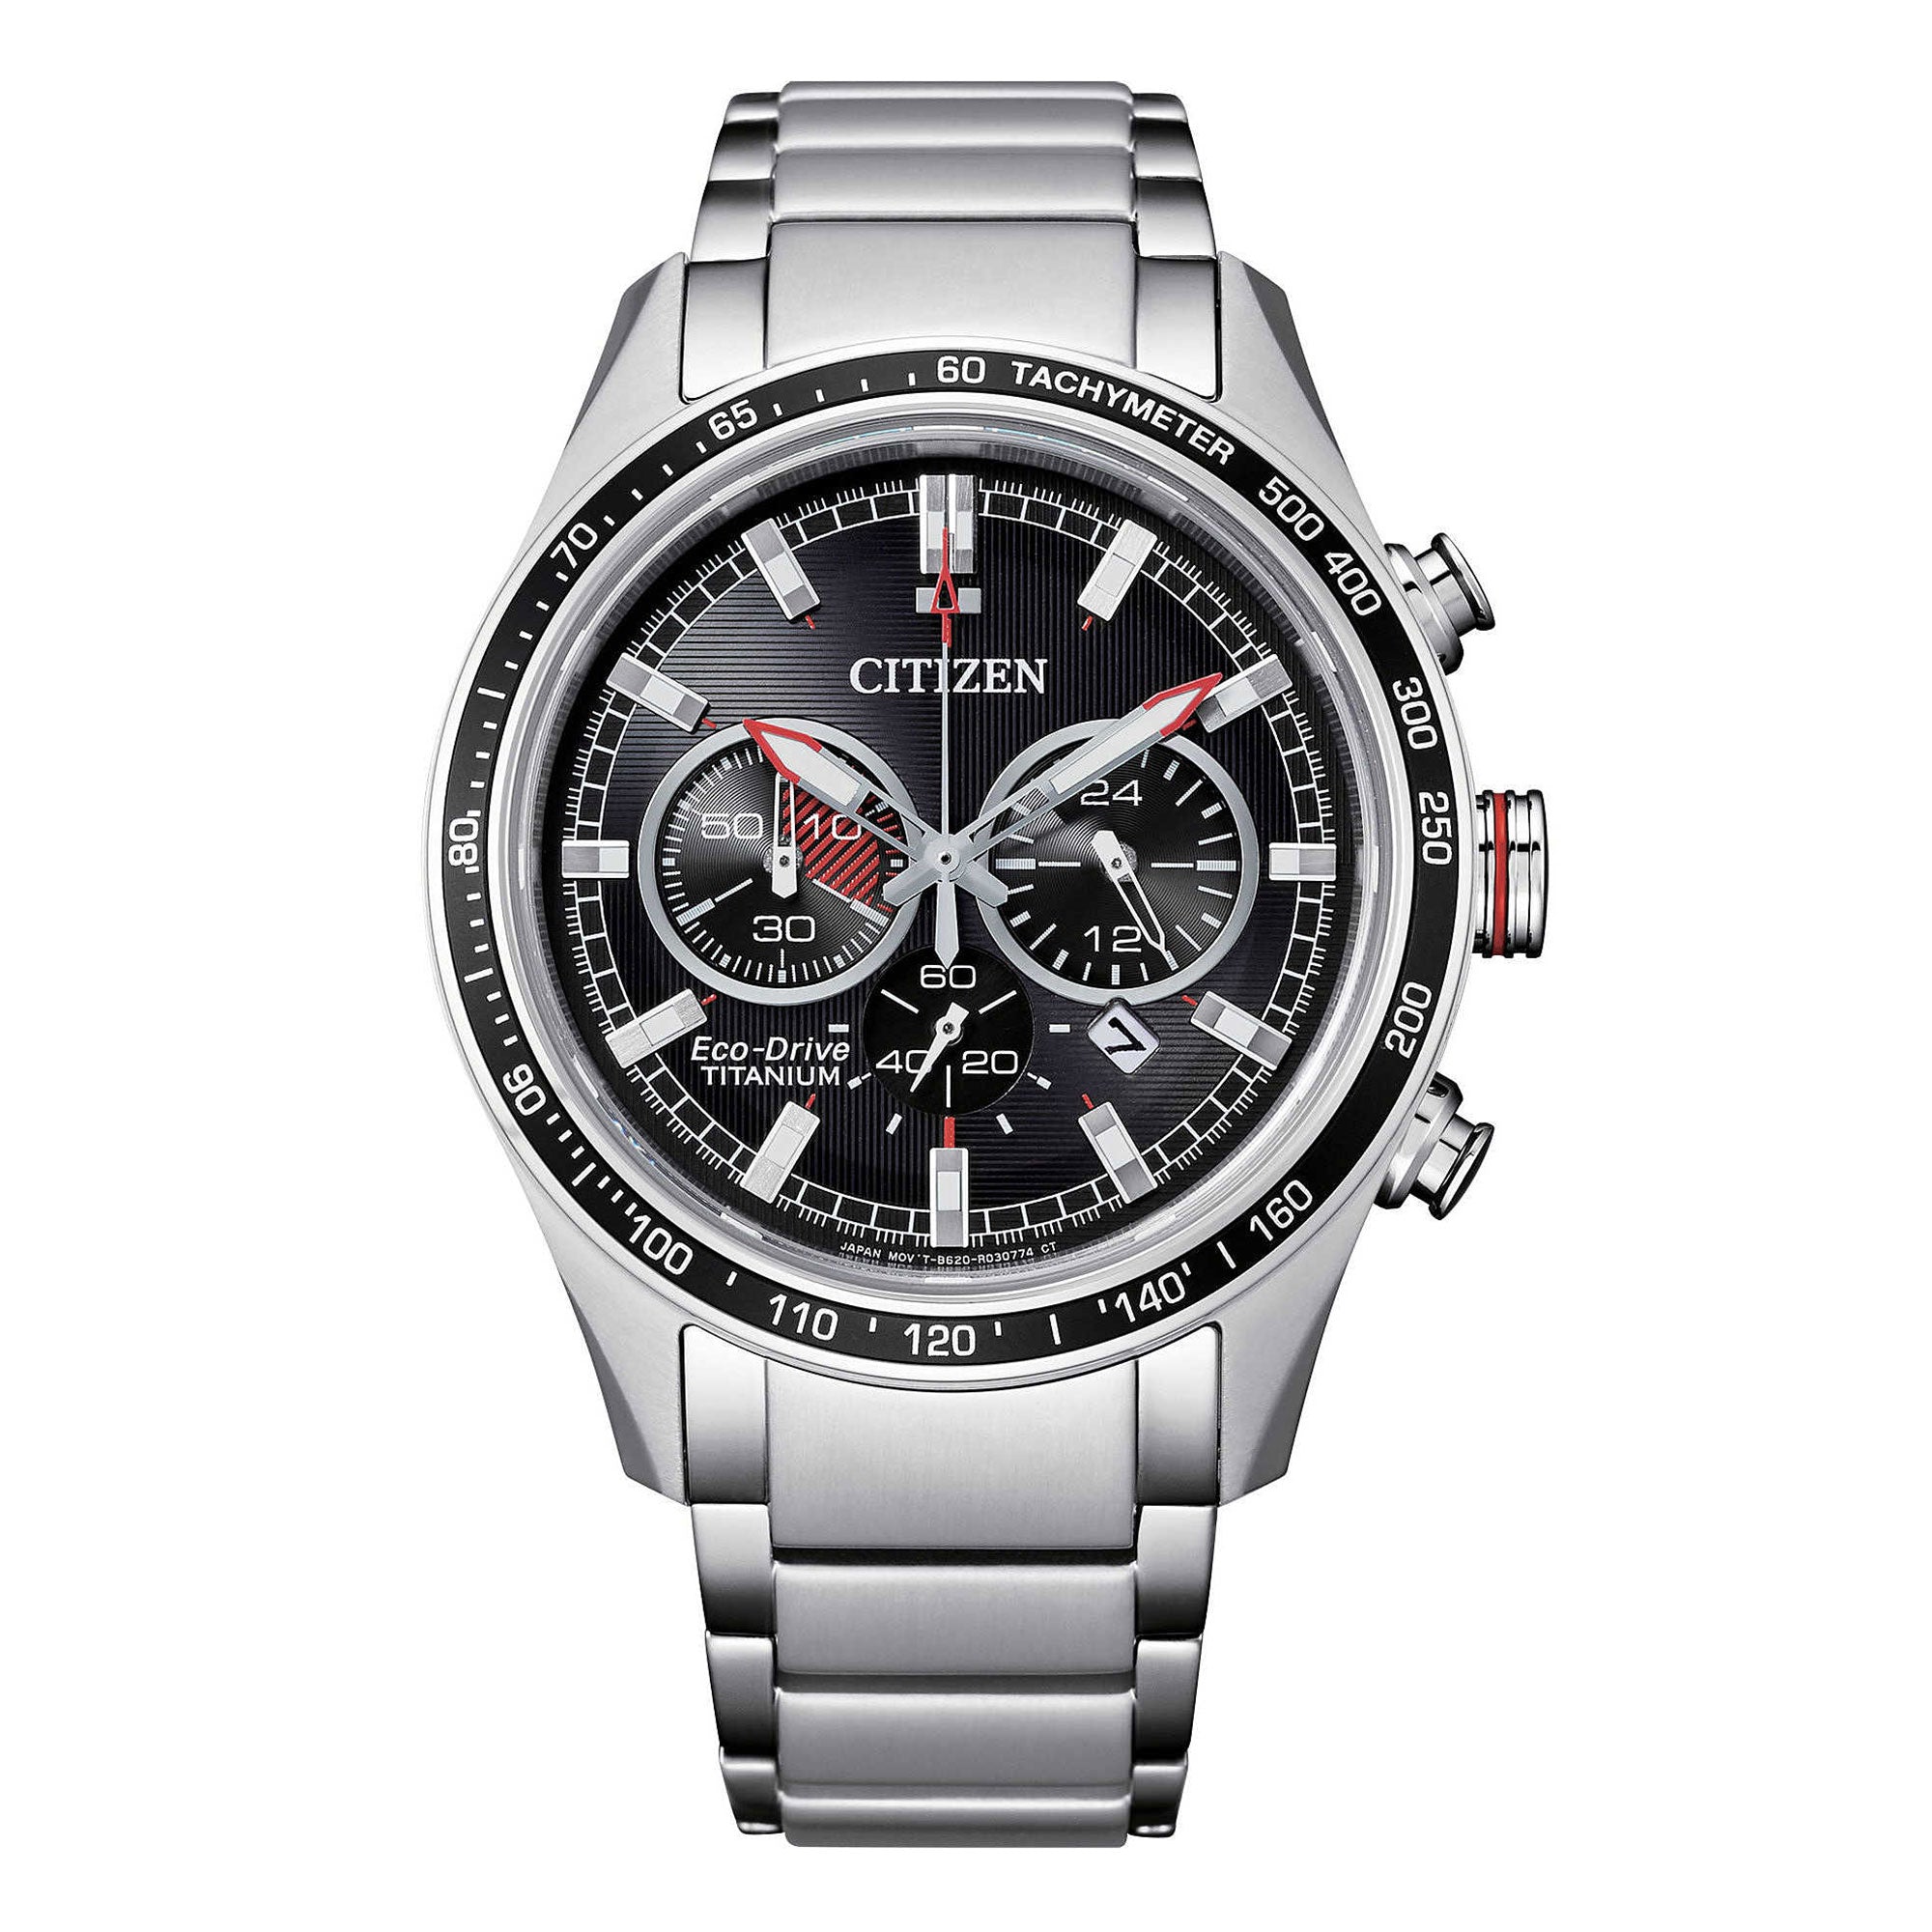 Wristwatches Citizen 40mm Citizen Eco Drive Panda Chronograph Watch  Sapphire Crystal Made in Japan 